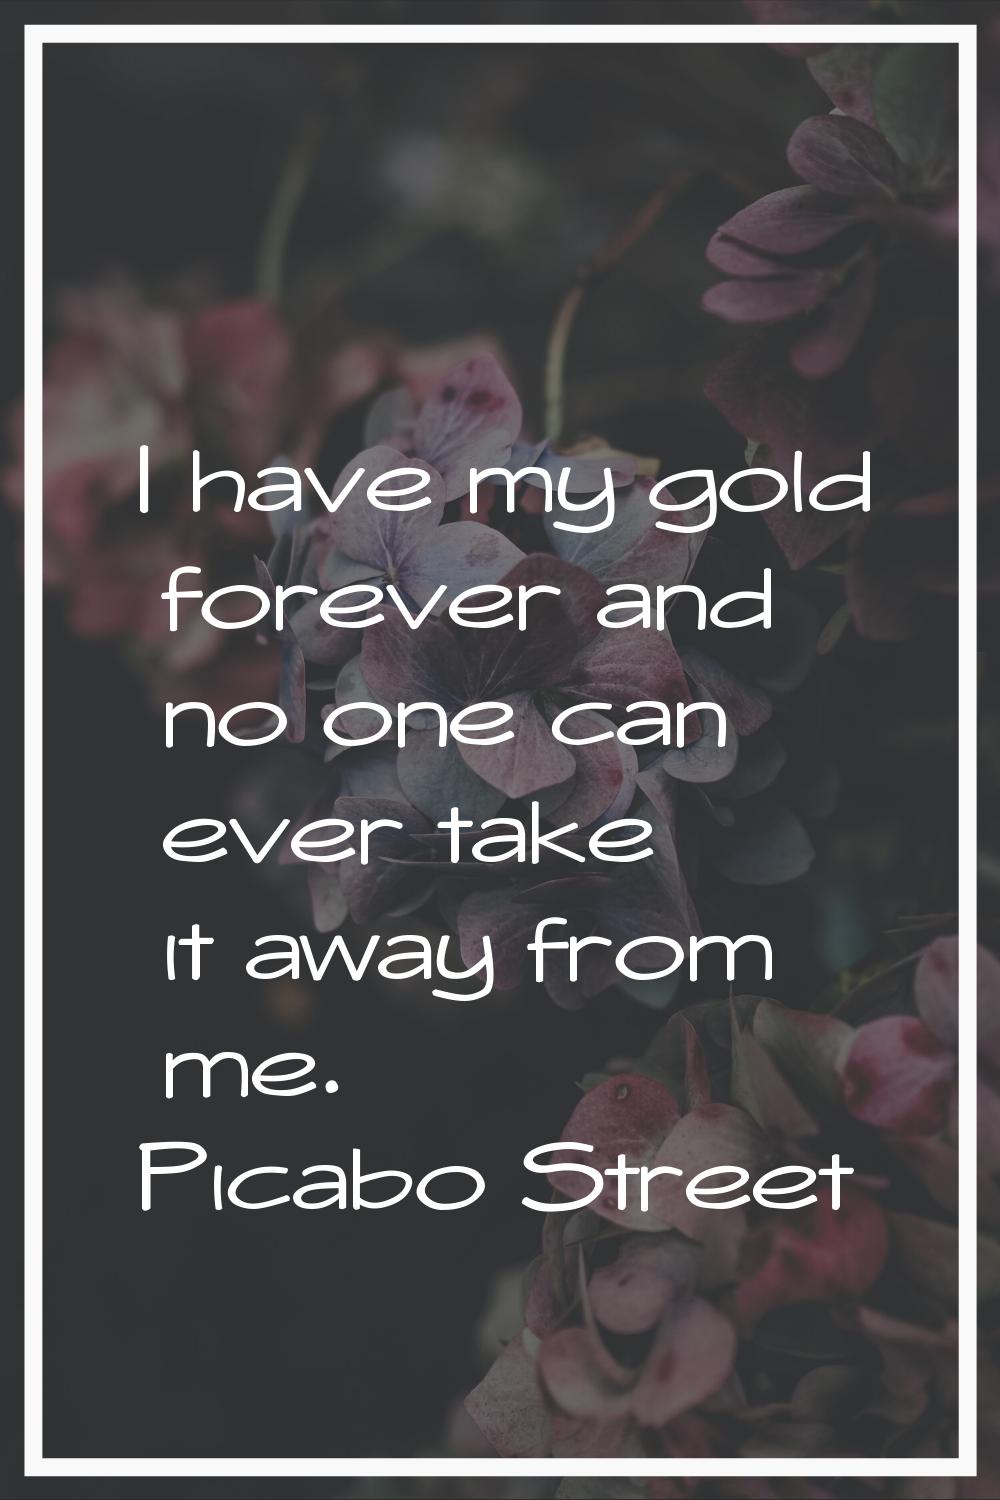 I have my gold forever and no one can ever take it away from me.